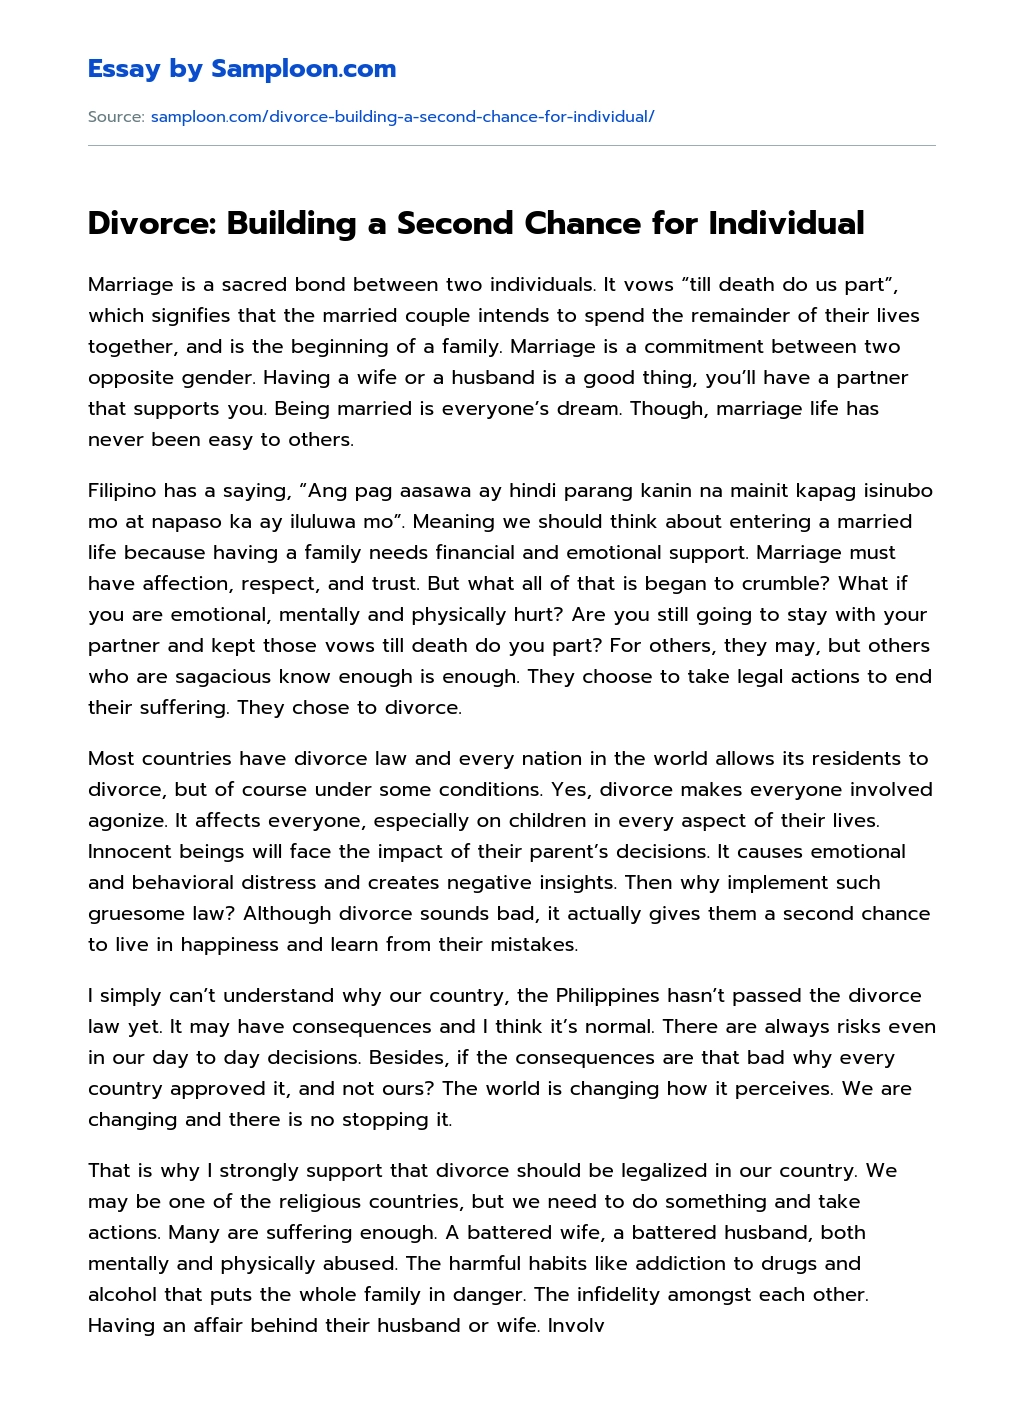 Divorce: Building a Second Chance for Individual essay